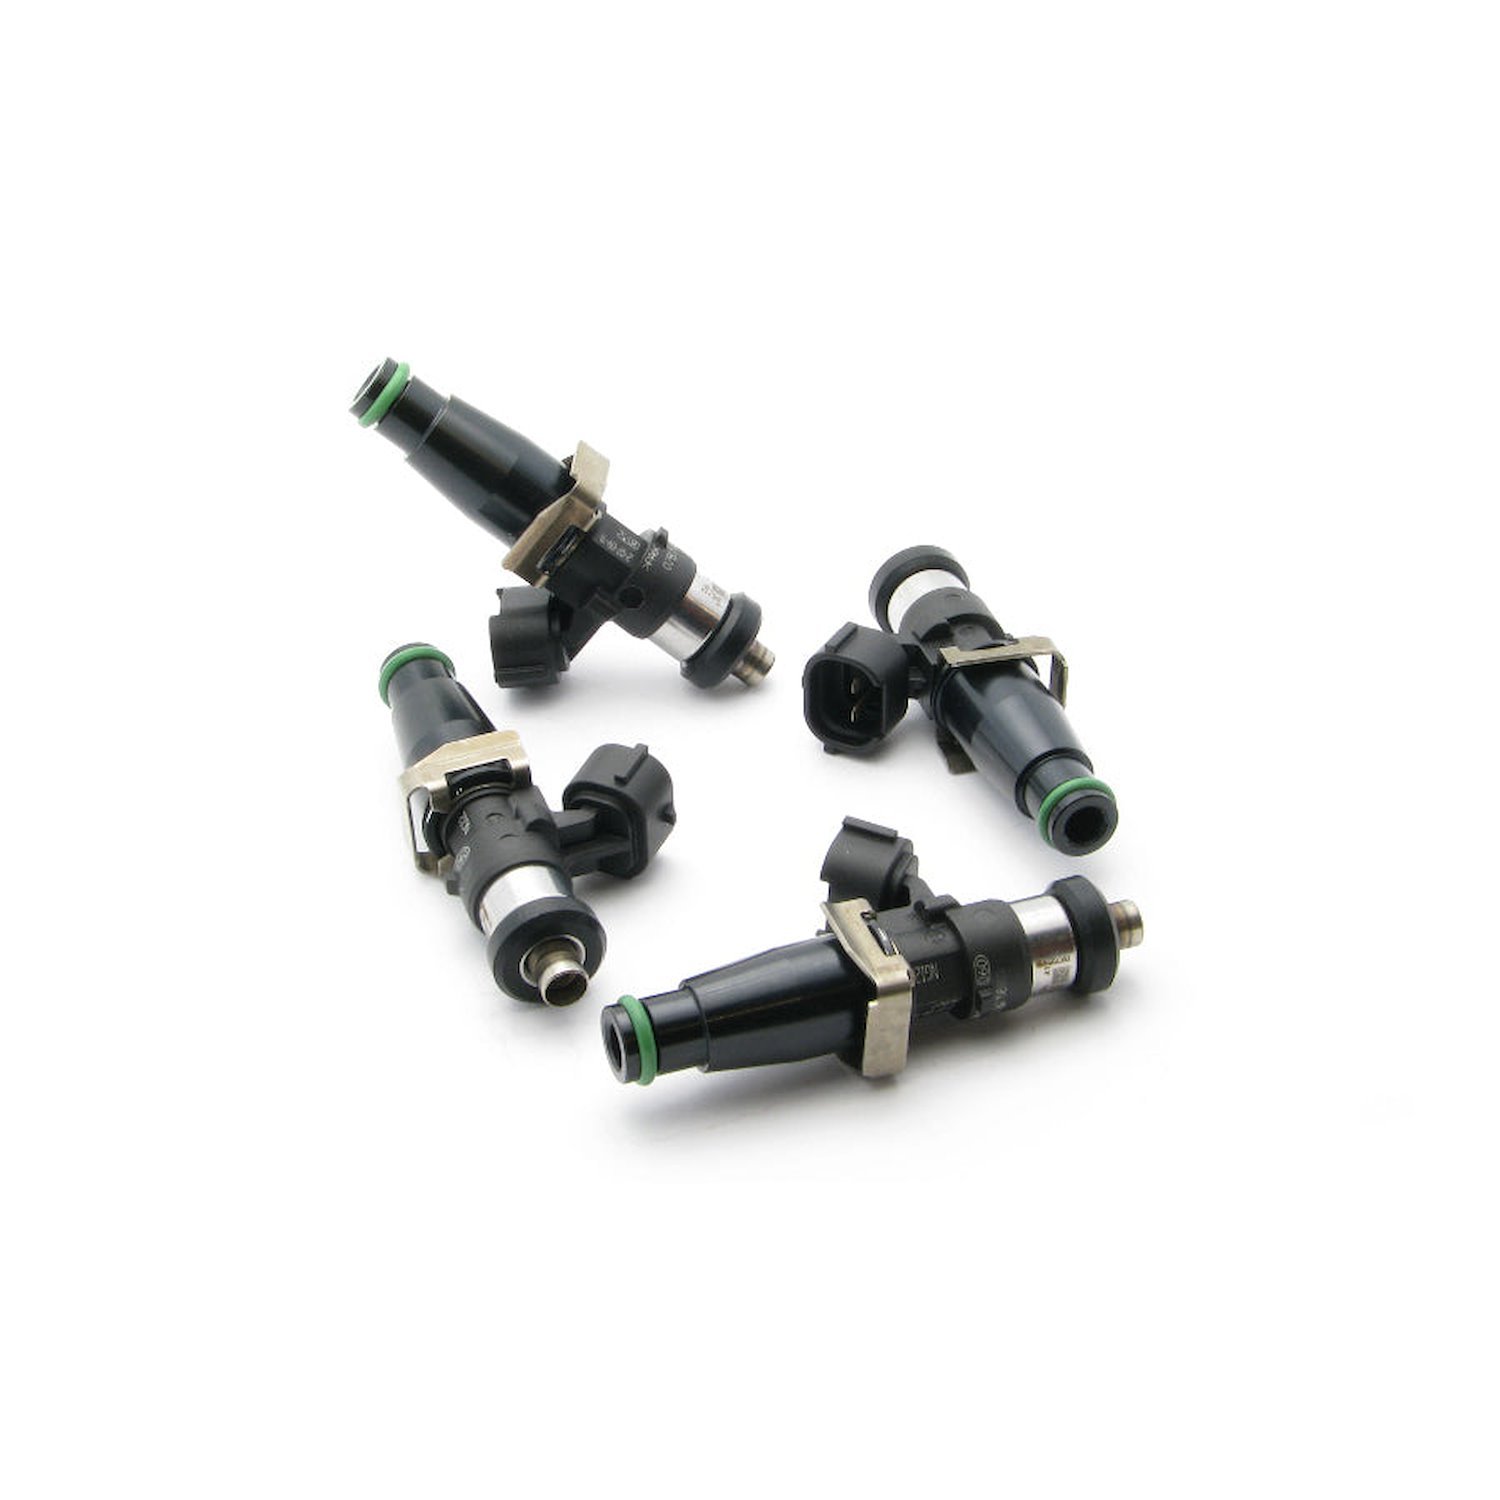 16S0322004  2200cc high Impedance Injectors for Mitsubishi Eclipse (DSM) 4G63T 95-99 and EVO 8/9 4G63T 03-06